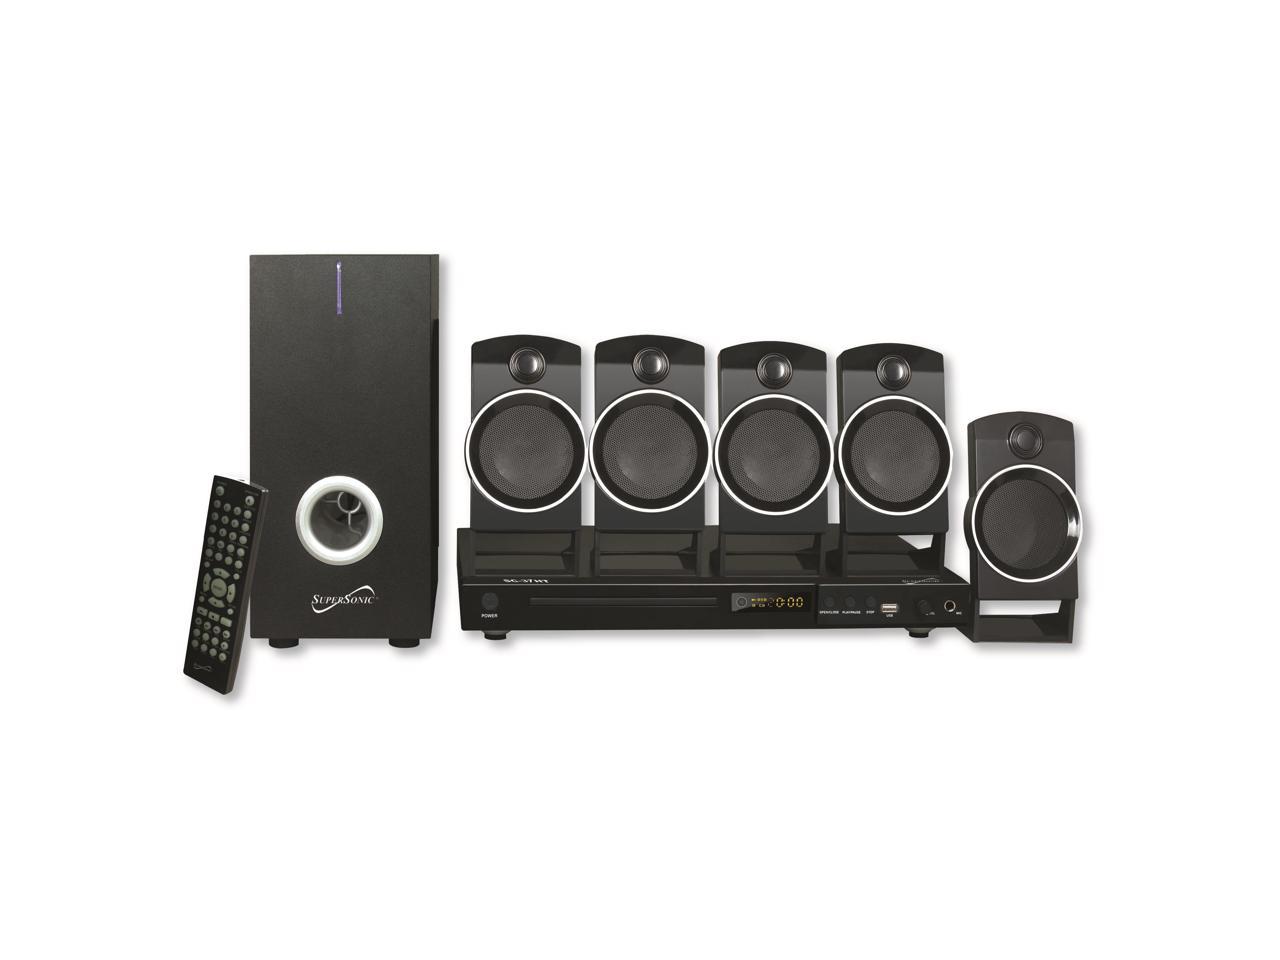 SUPERSONIC SC-37HT 5.1 Channel Dvd Home Theater System With USB Input & Karaoke Function - image 1 of 13